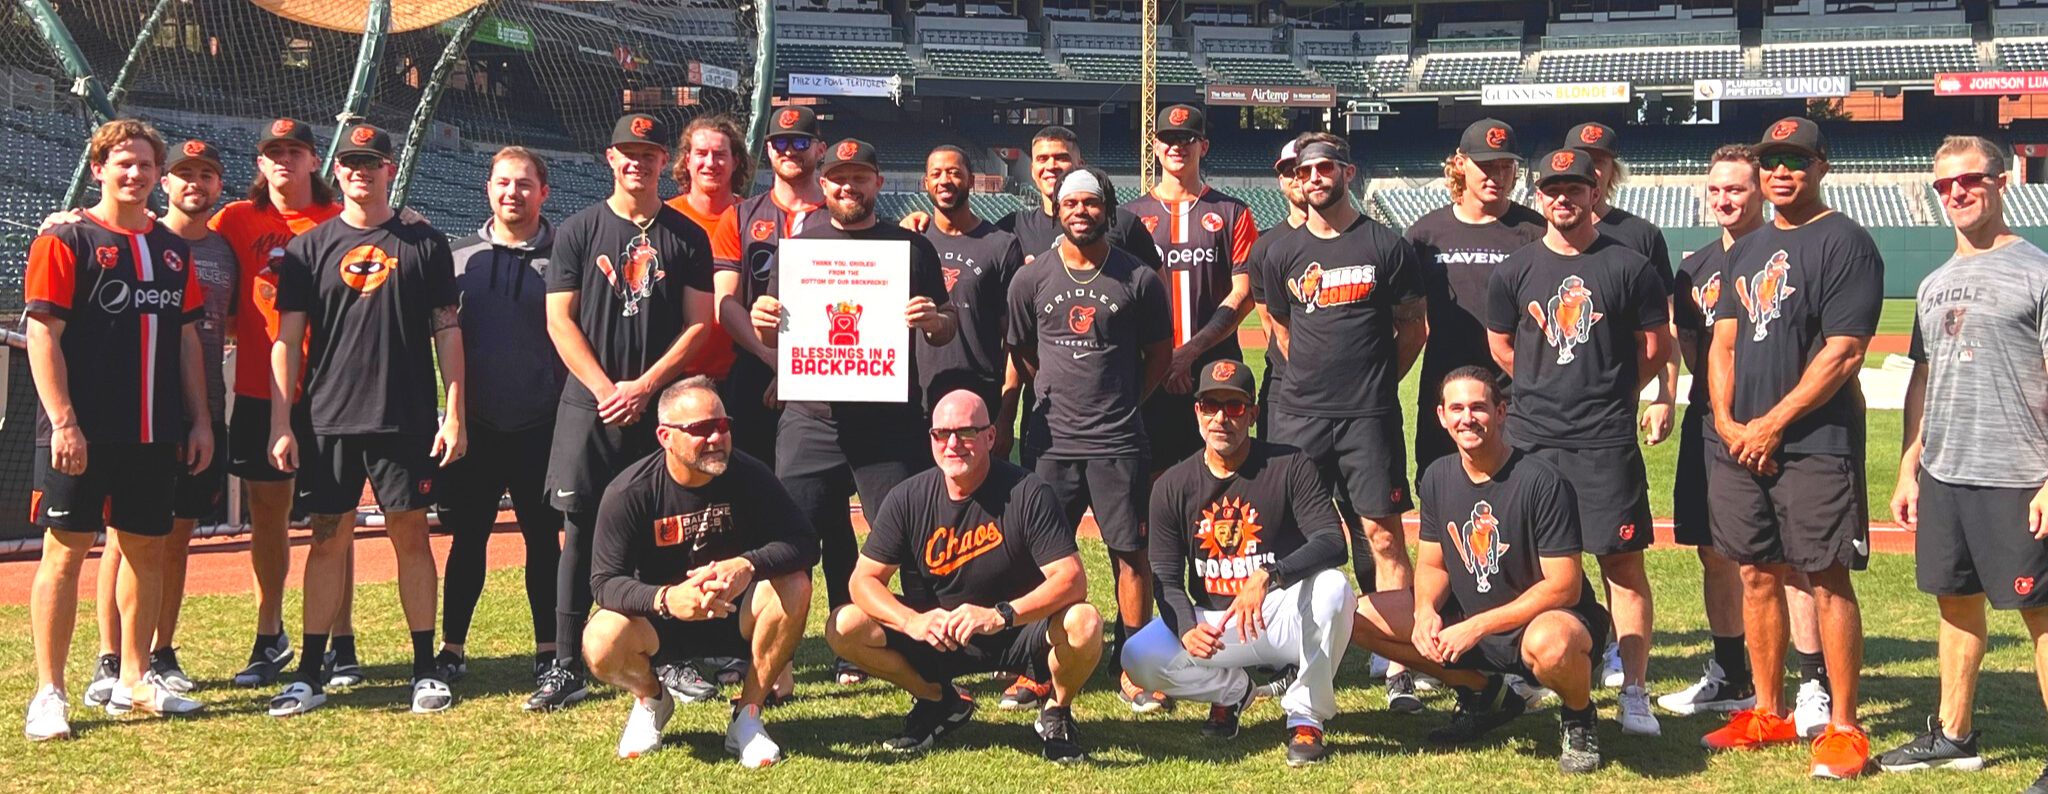 The Baltimore Orioles strike out hunger with Blessings in a Backpack